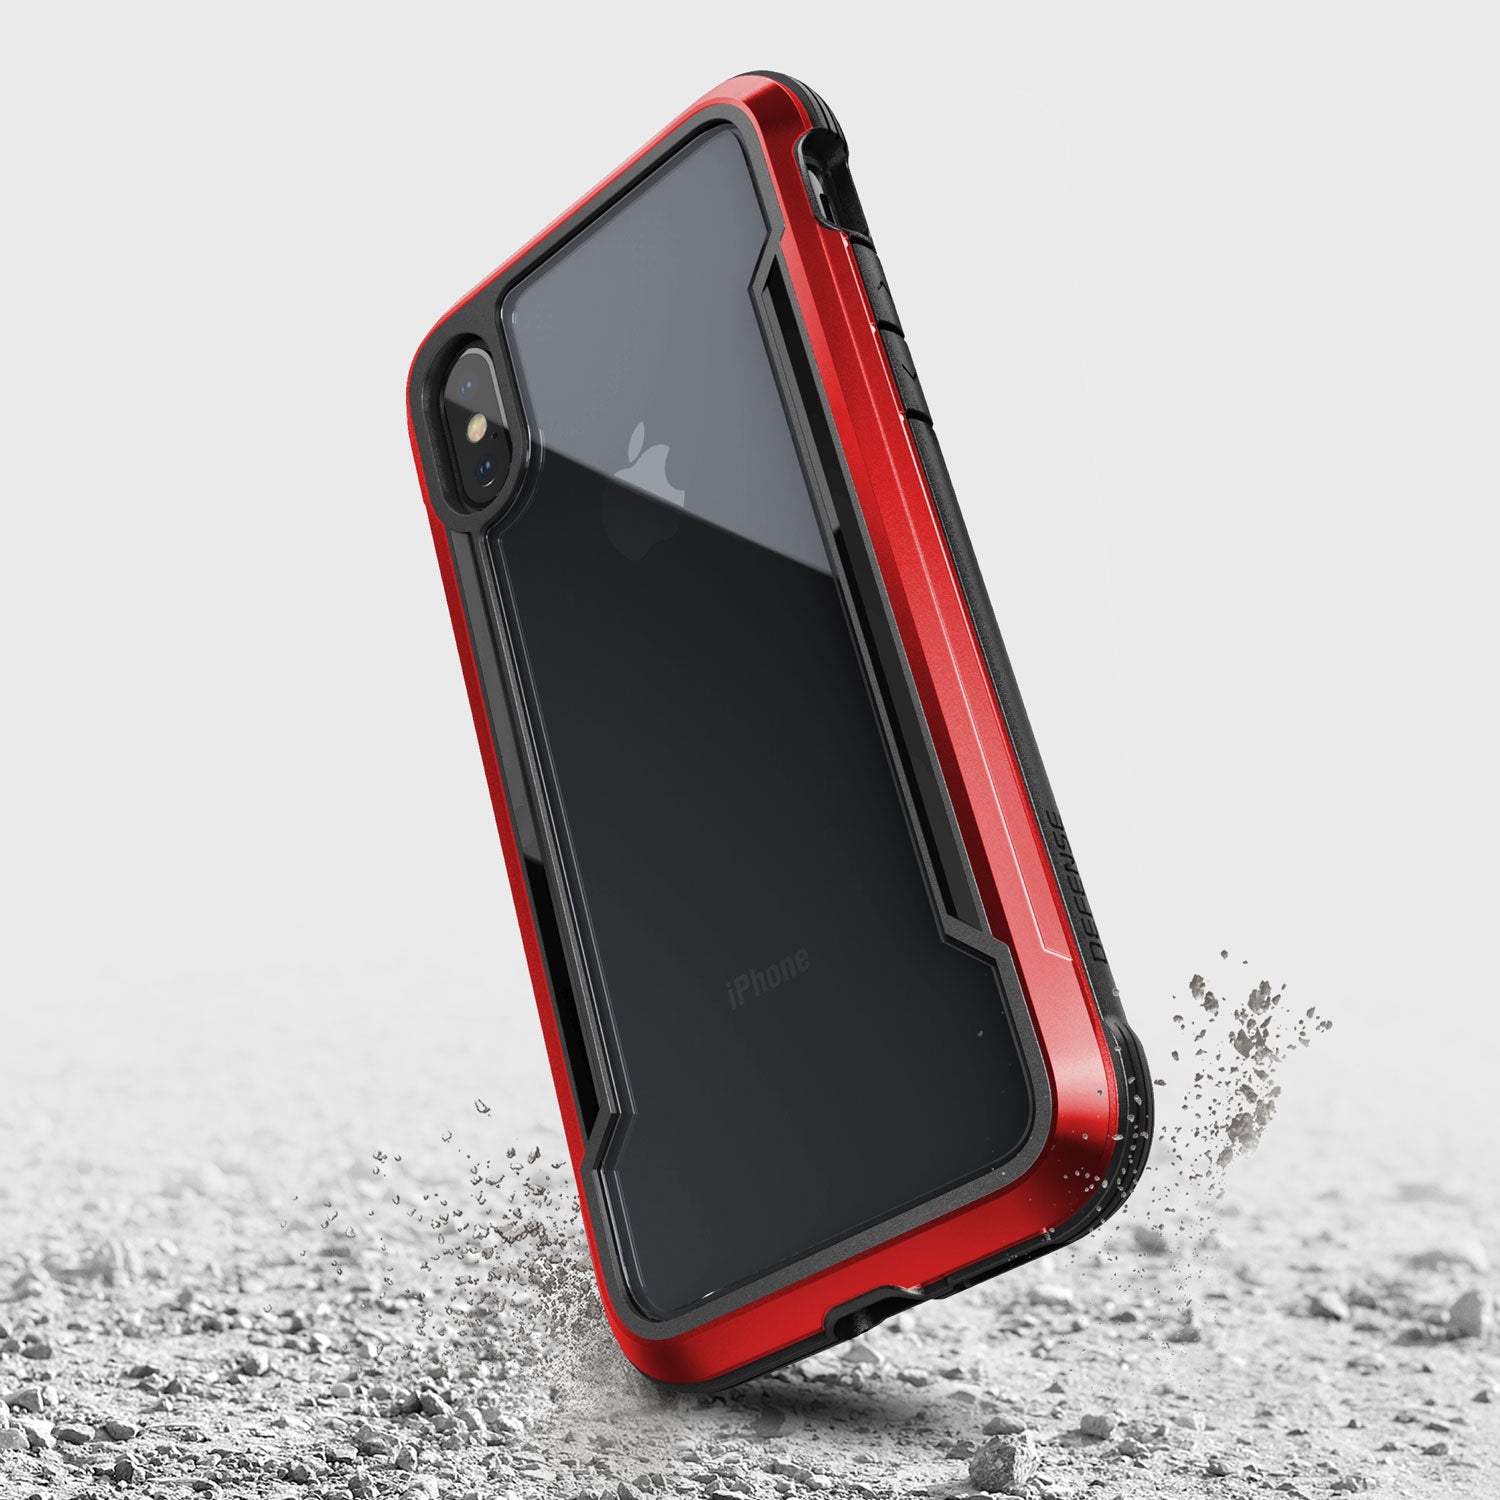 A Raptic SHIELD case for iPhone XS Max providing drop protection, found on the ground.